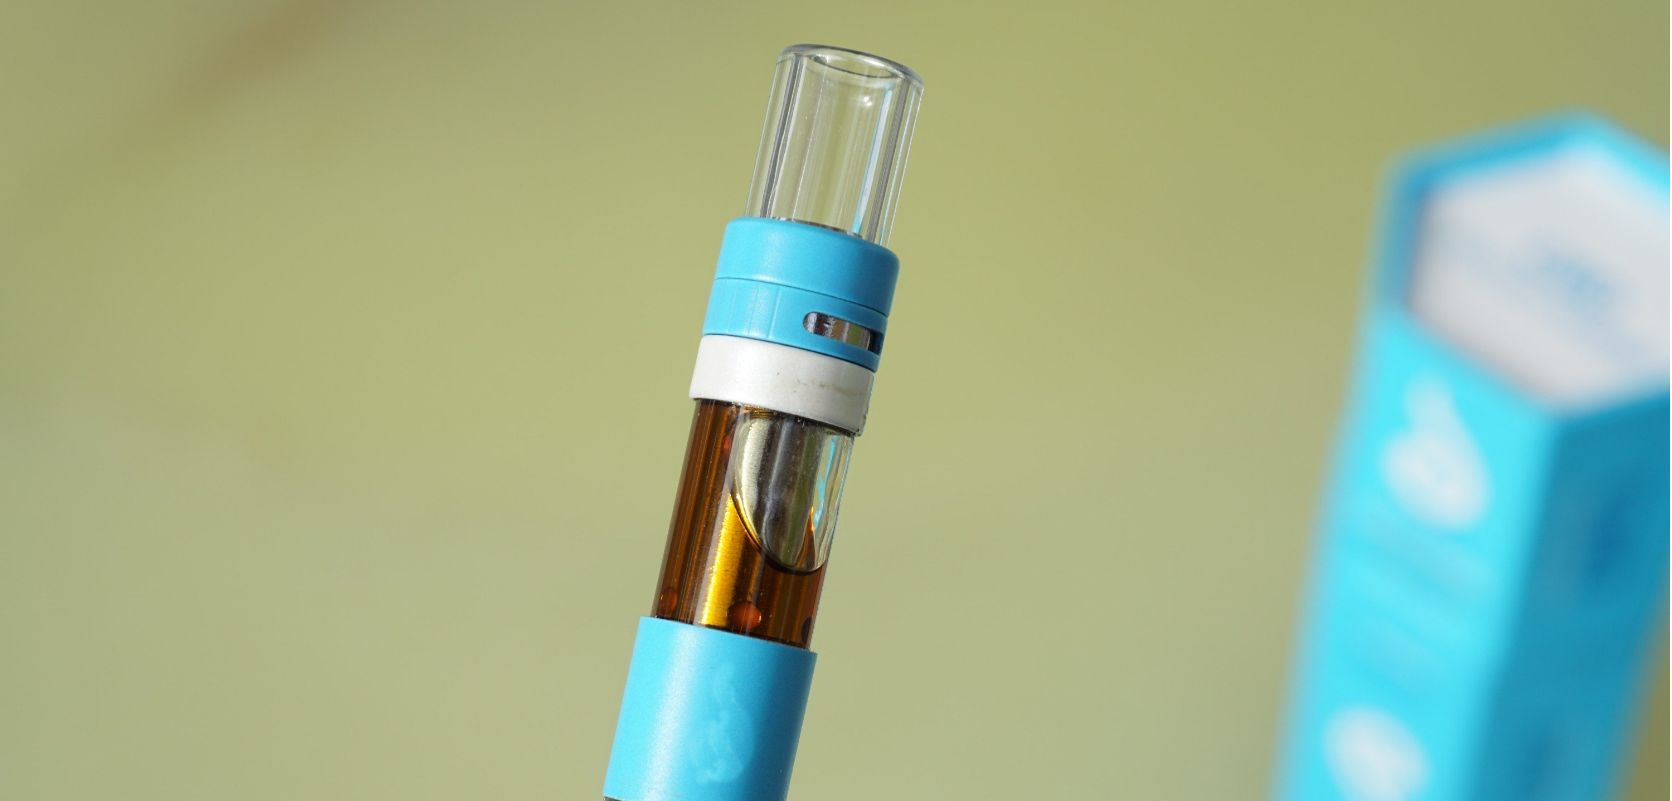 A wax pen or dab pen is a handheld device designed for consuming cannabis concentrates. 